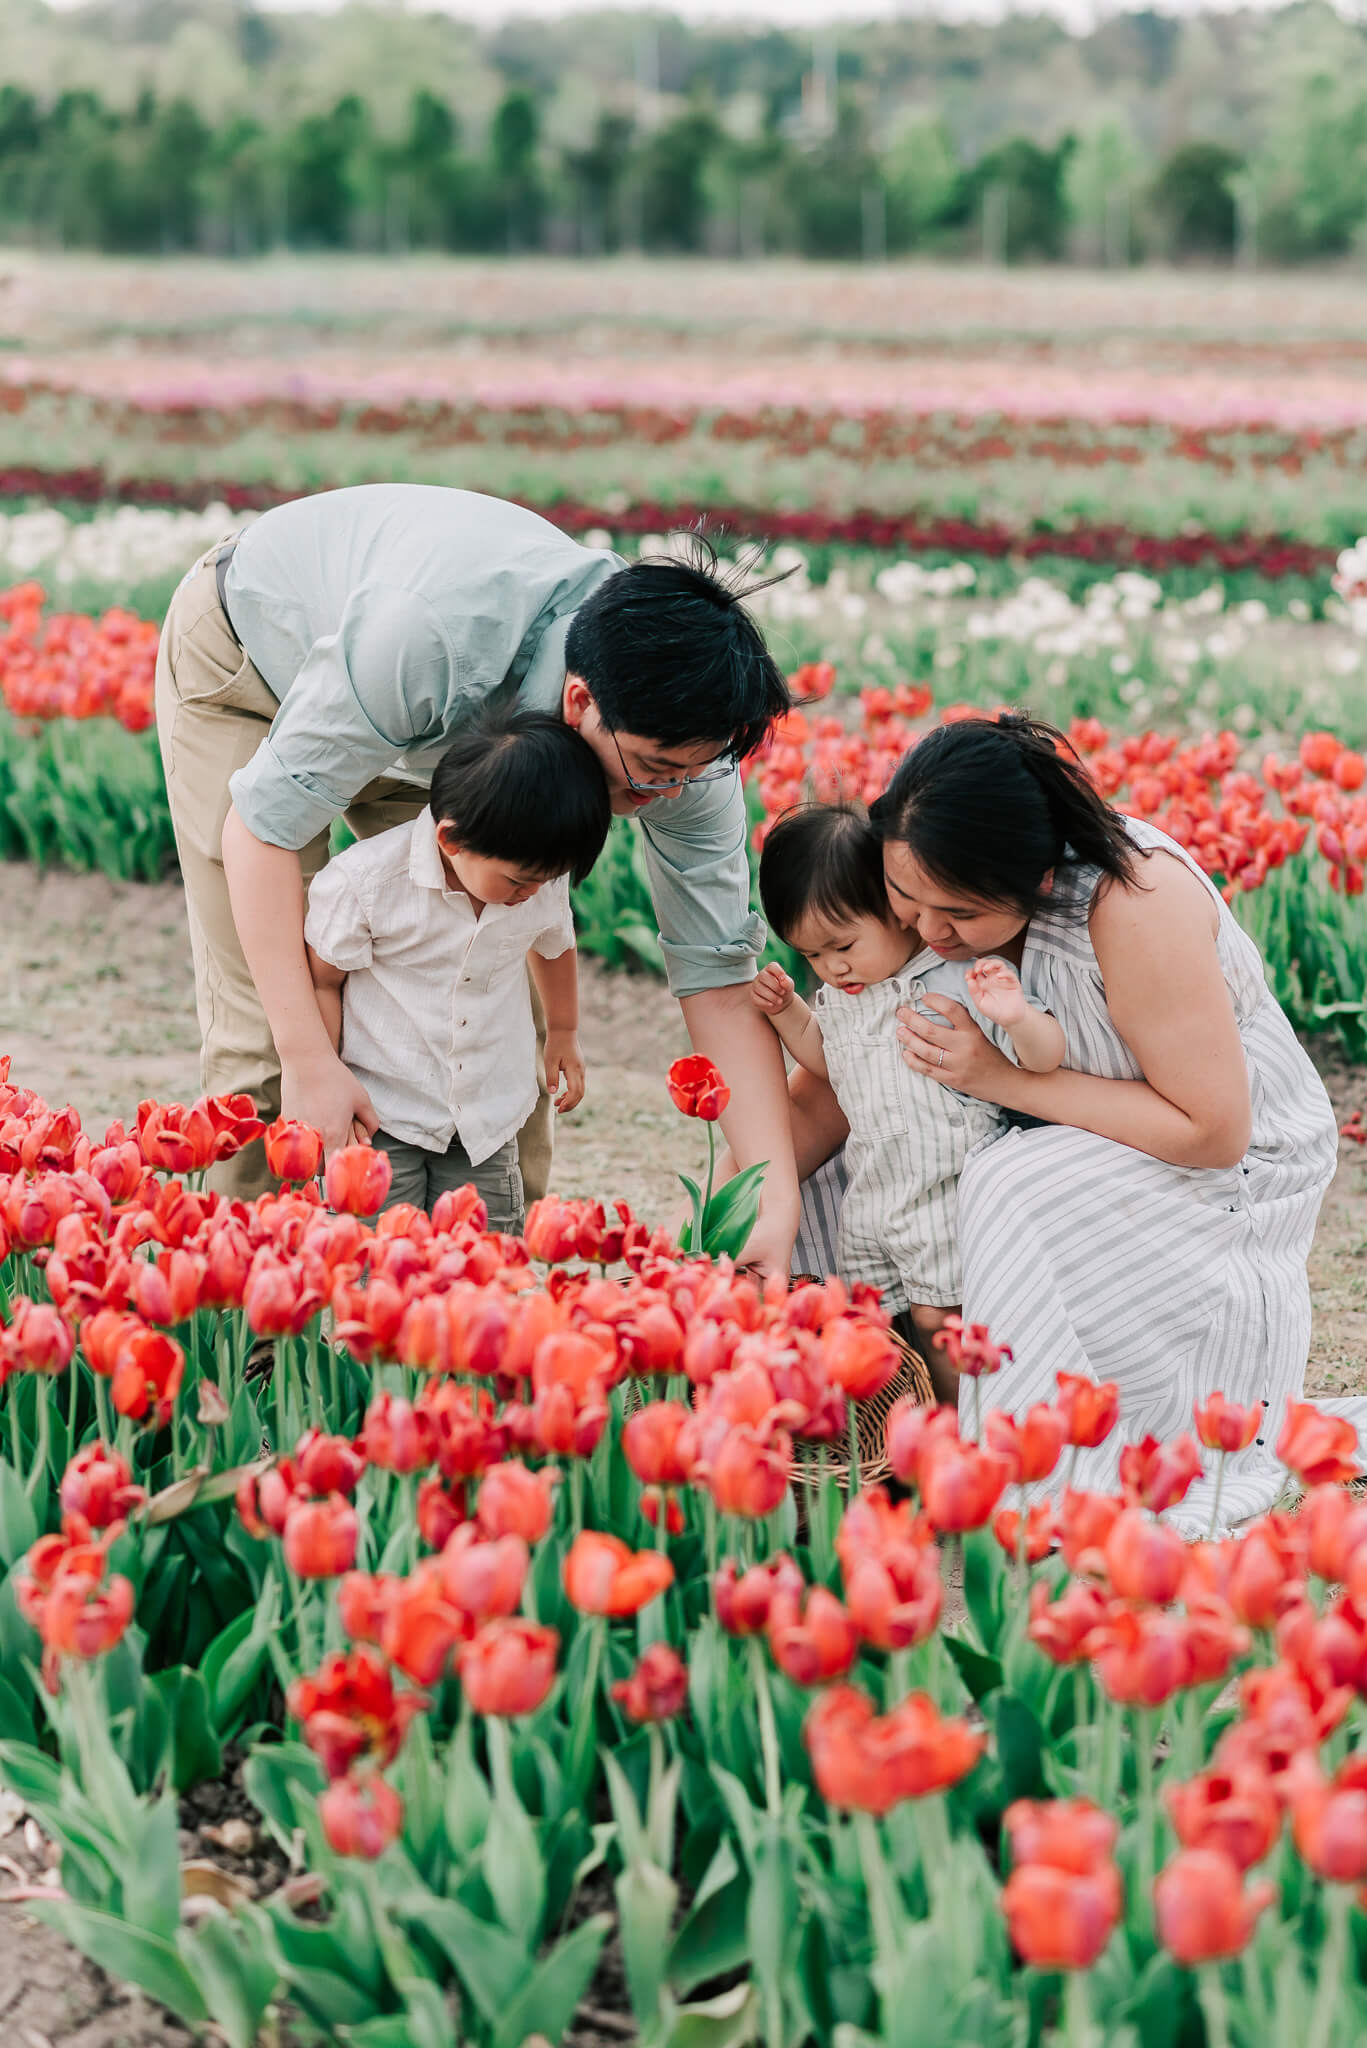 A family of four play and pick flowers in a large tulip farm